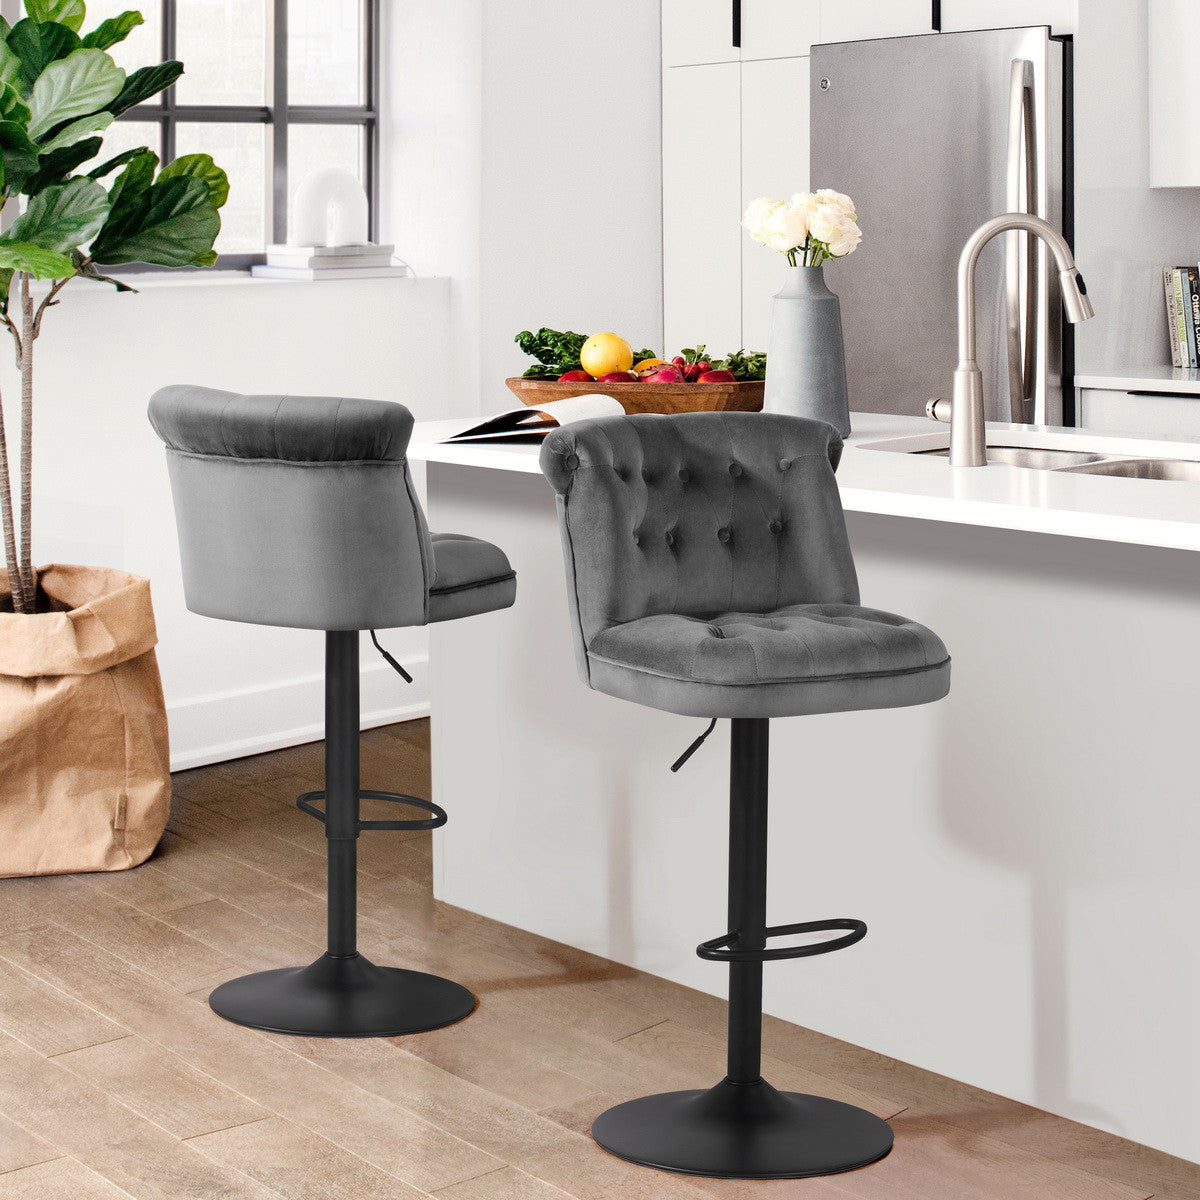 Set of Two 26" Gray and Black Steel Swivel Low Back Adjustable Height Bar Chairs with Footrest